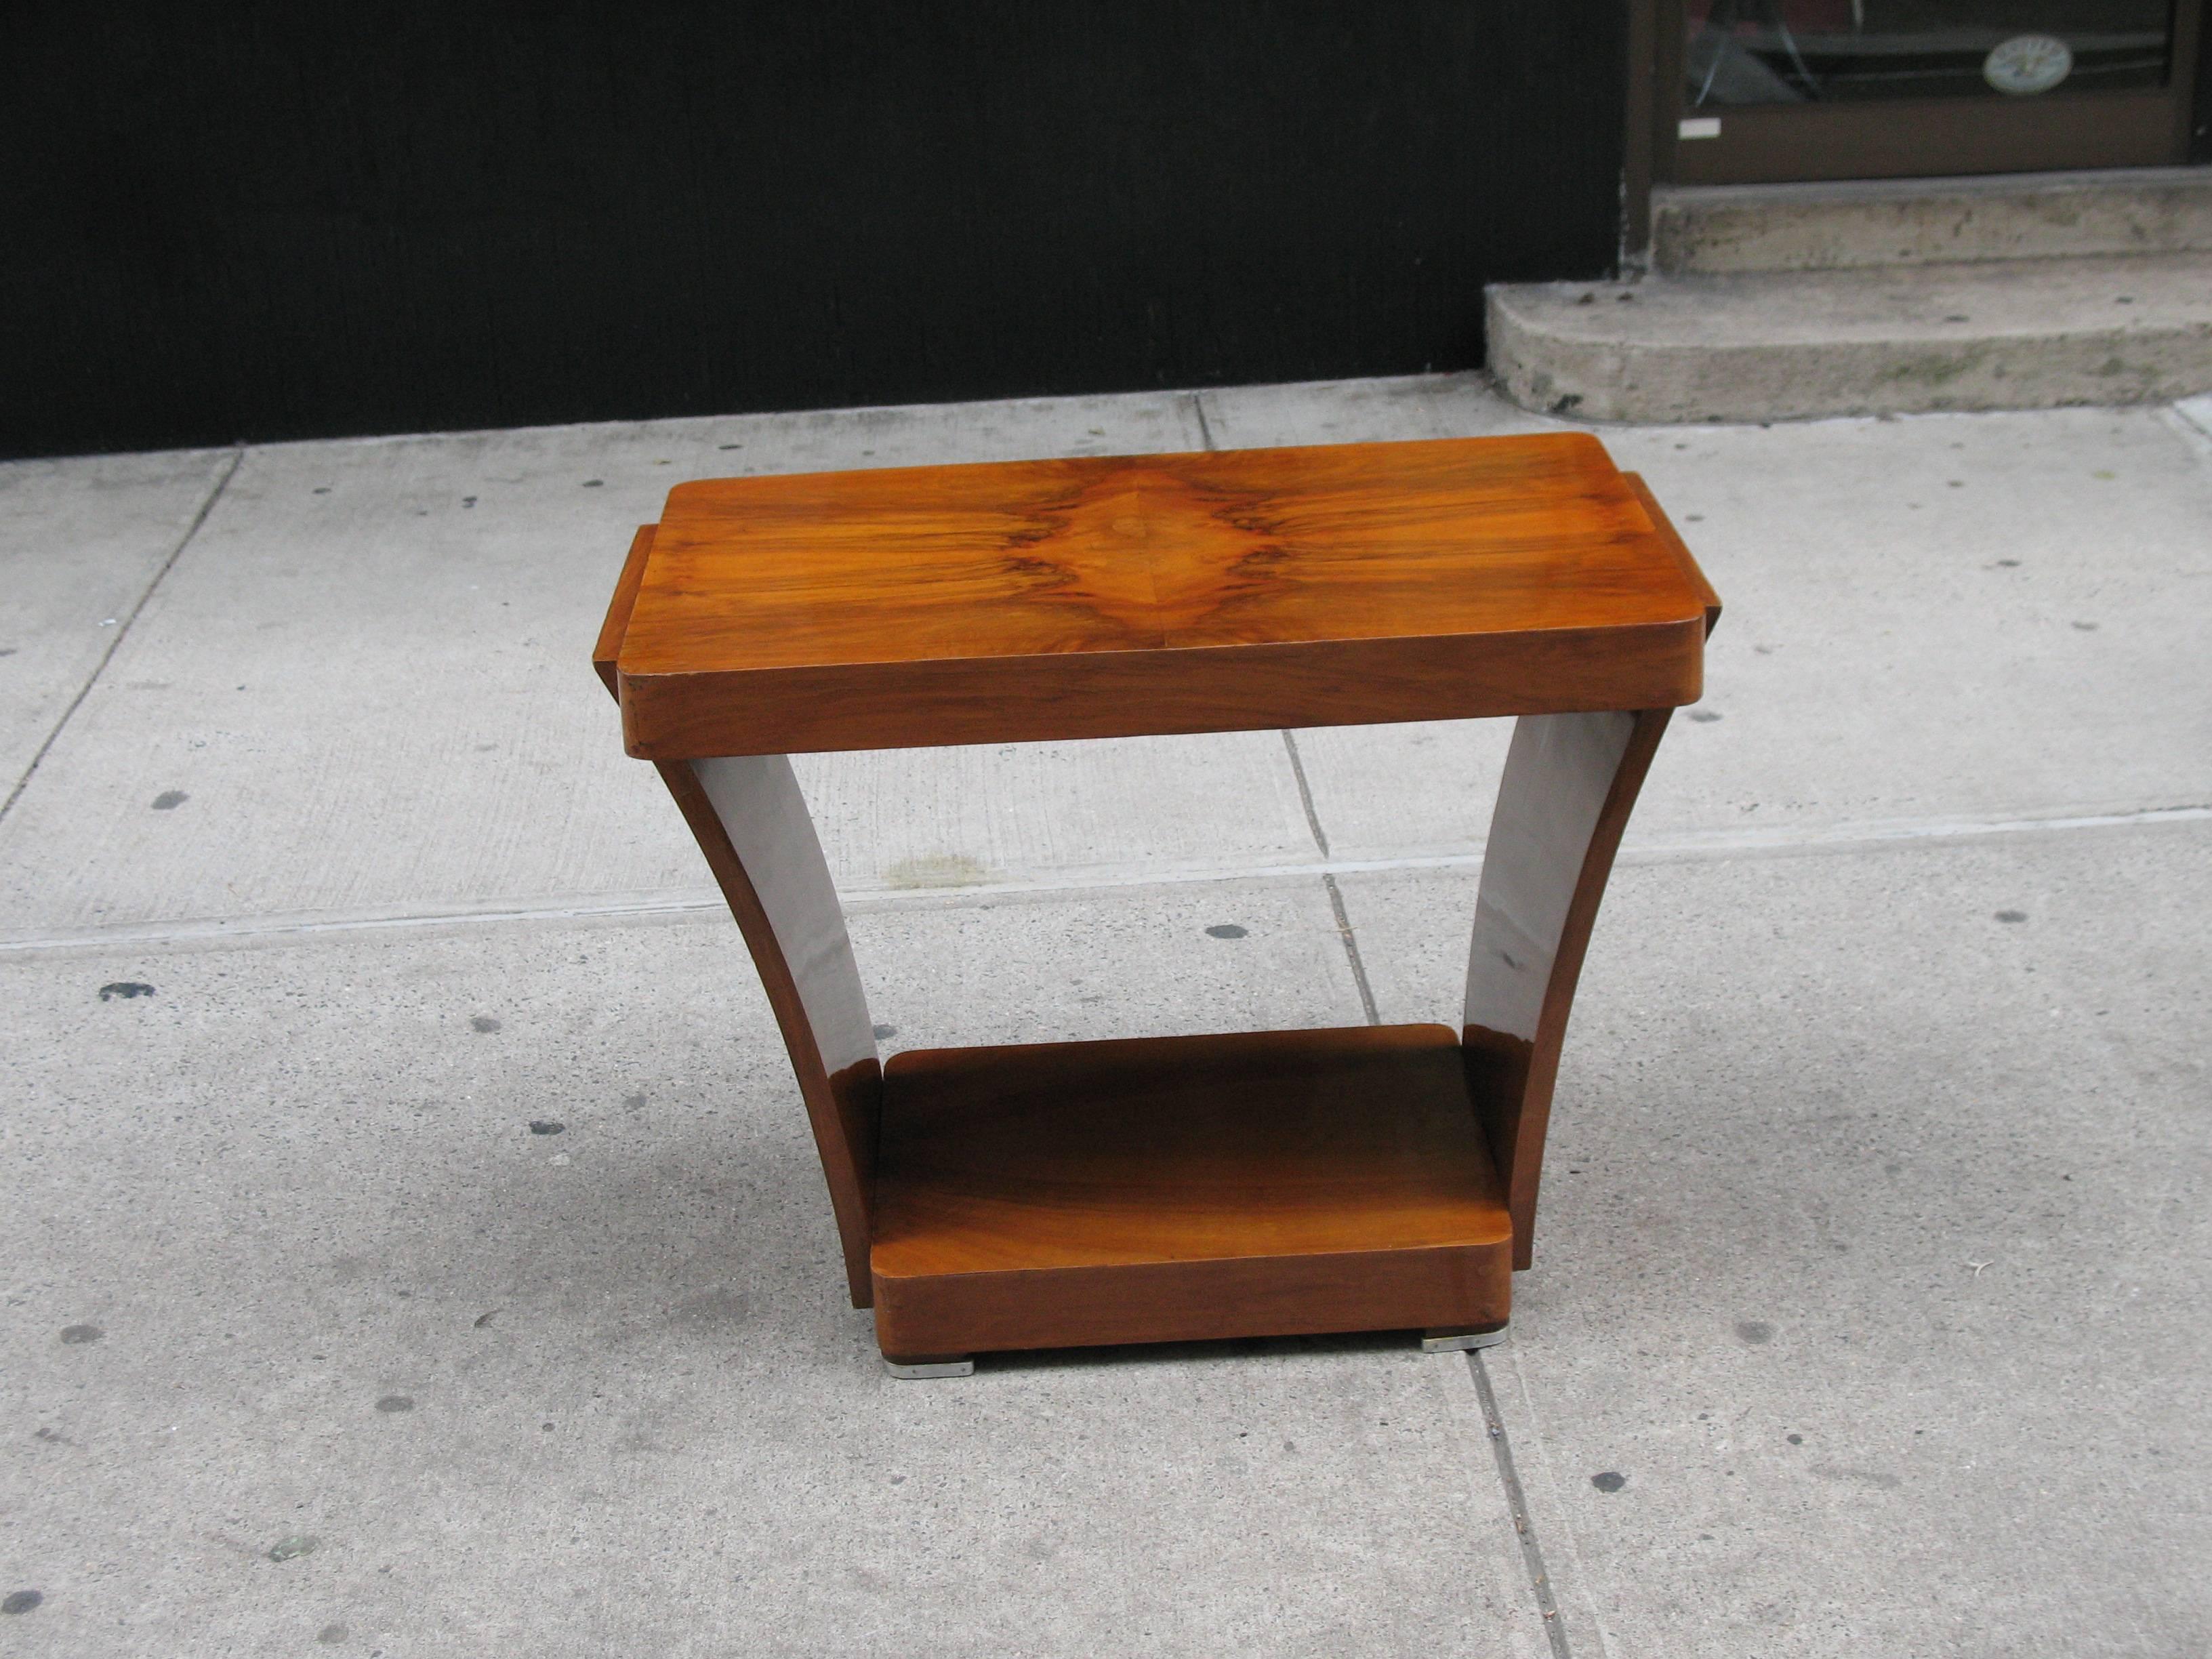 FROM OUR NEW MID -CENTURY MODERN & ART DECO SHIPMENT:
Unusually designed French Mid-Century Modern side table.
Walnut veneered on beech tree in book match pattern.
Concave supports. Feet with nickel molding.
Shellac-based French